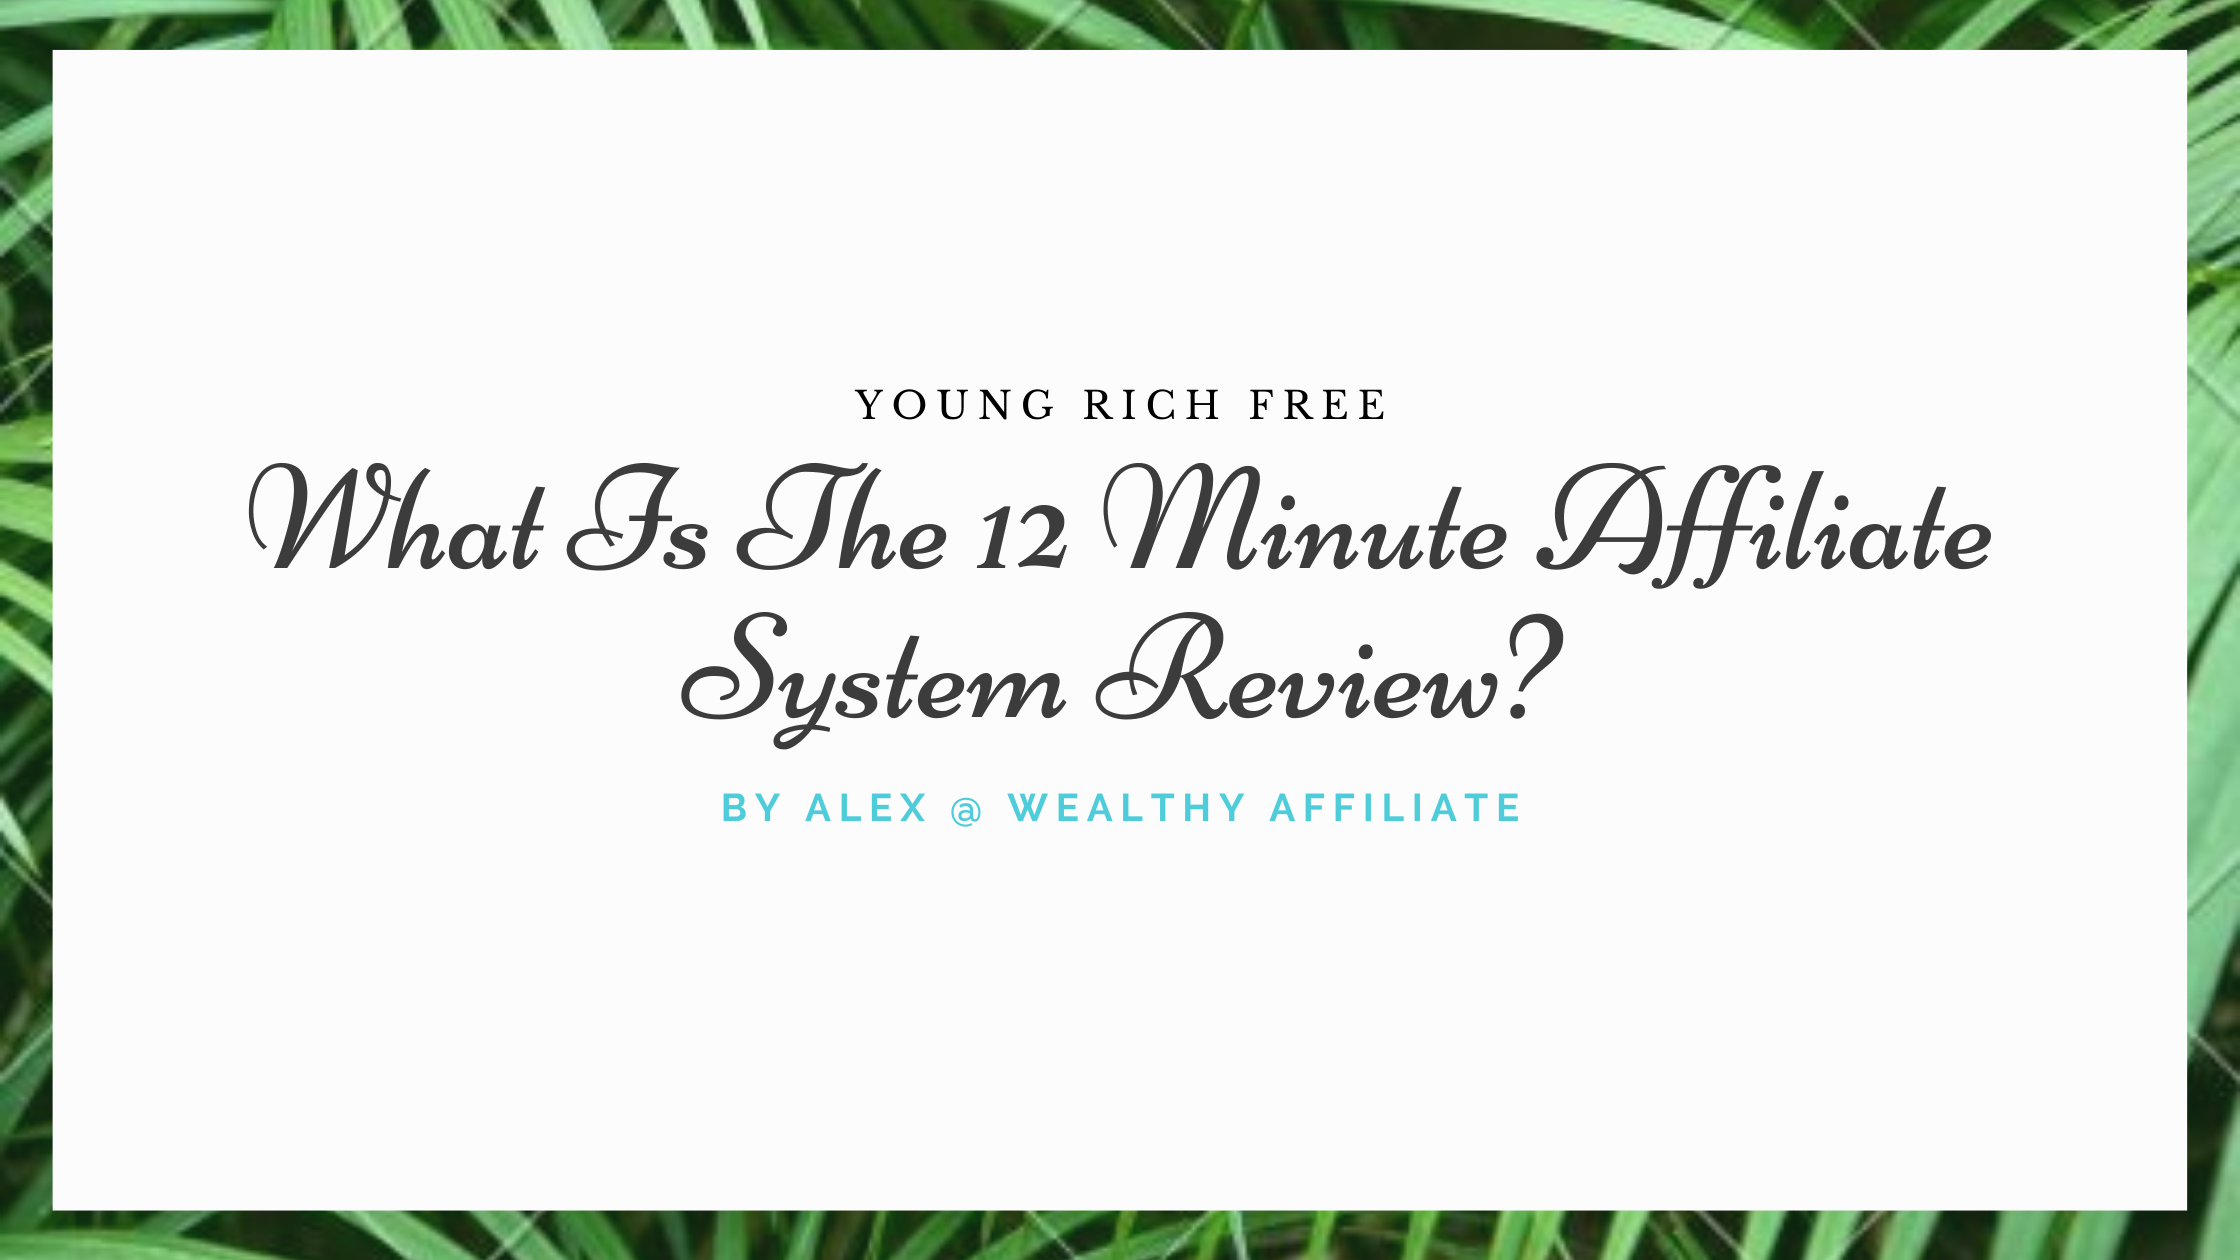 What Is The 12 Minute Affiliate System Review